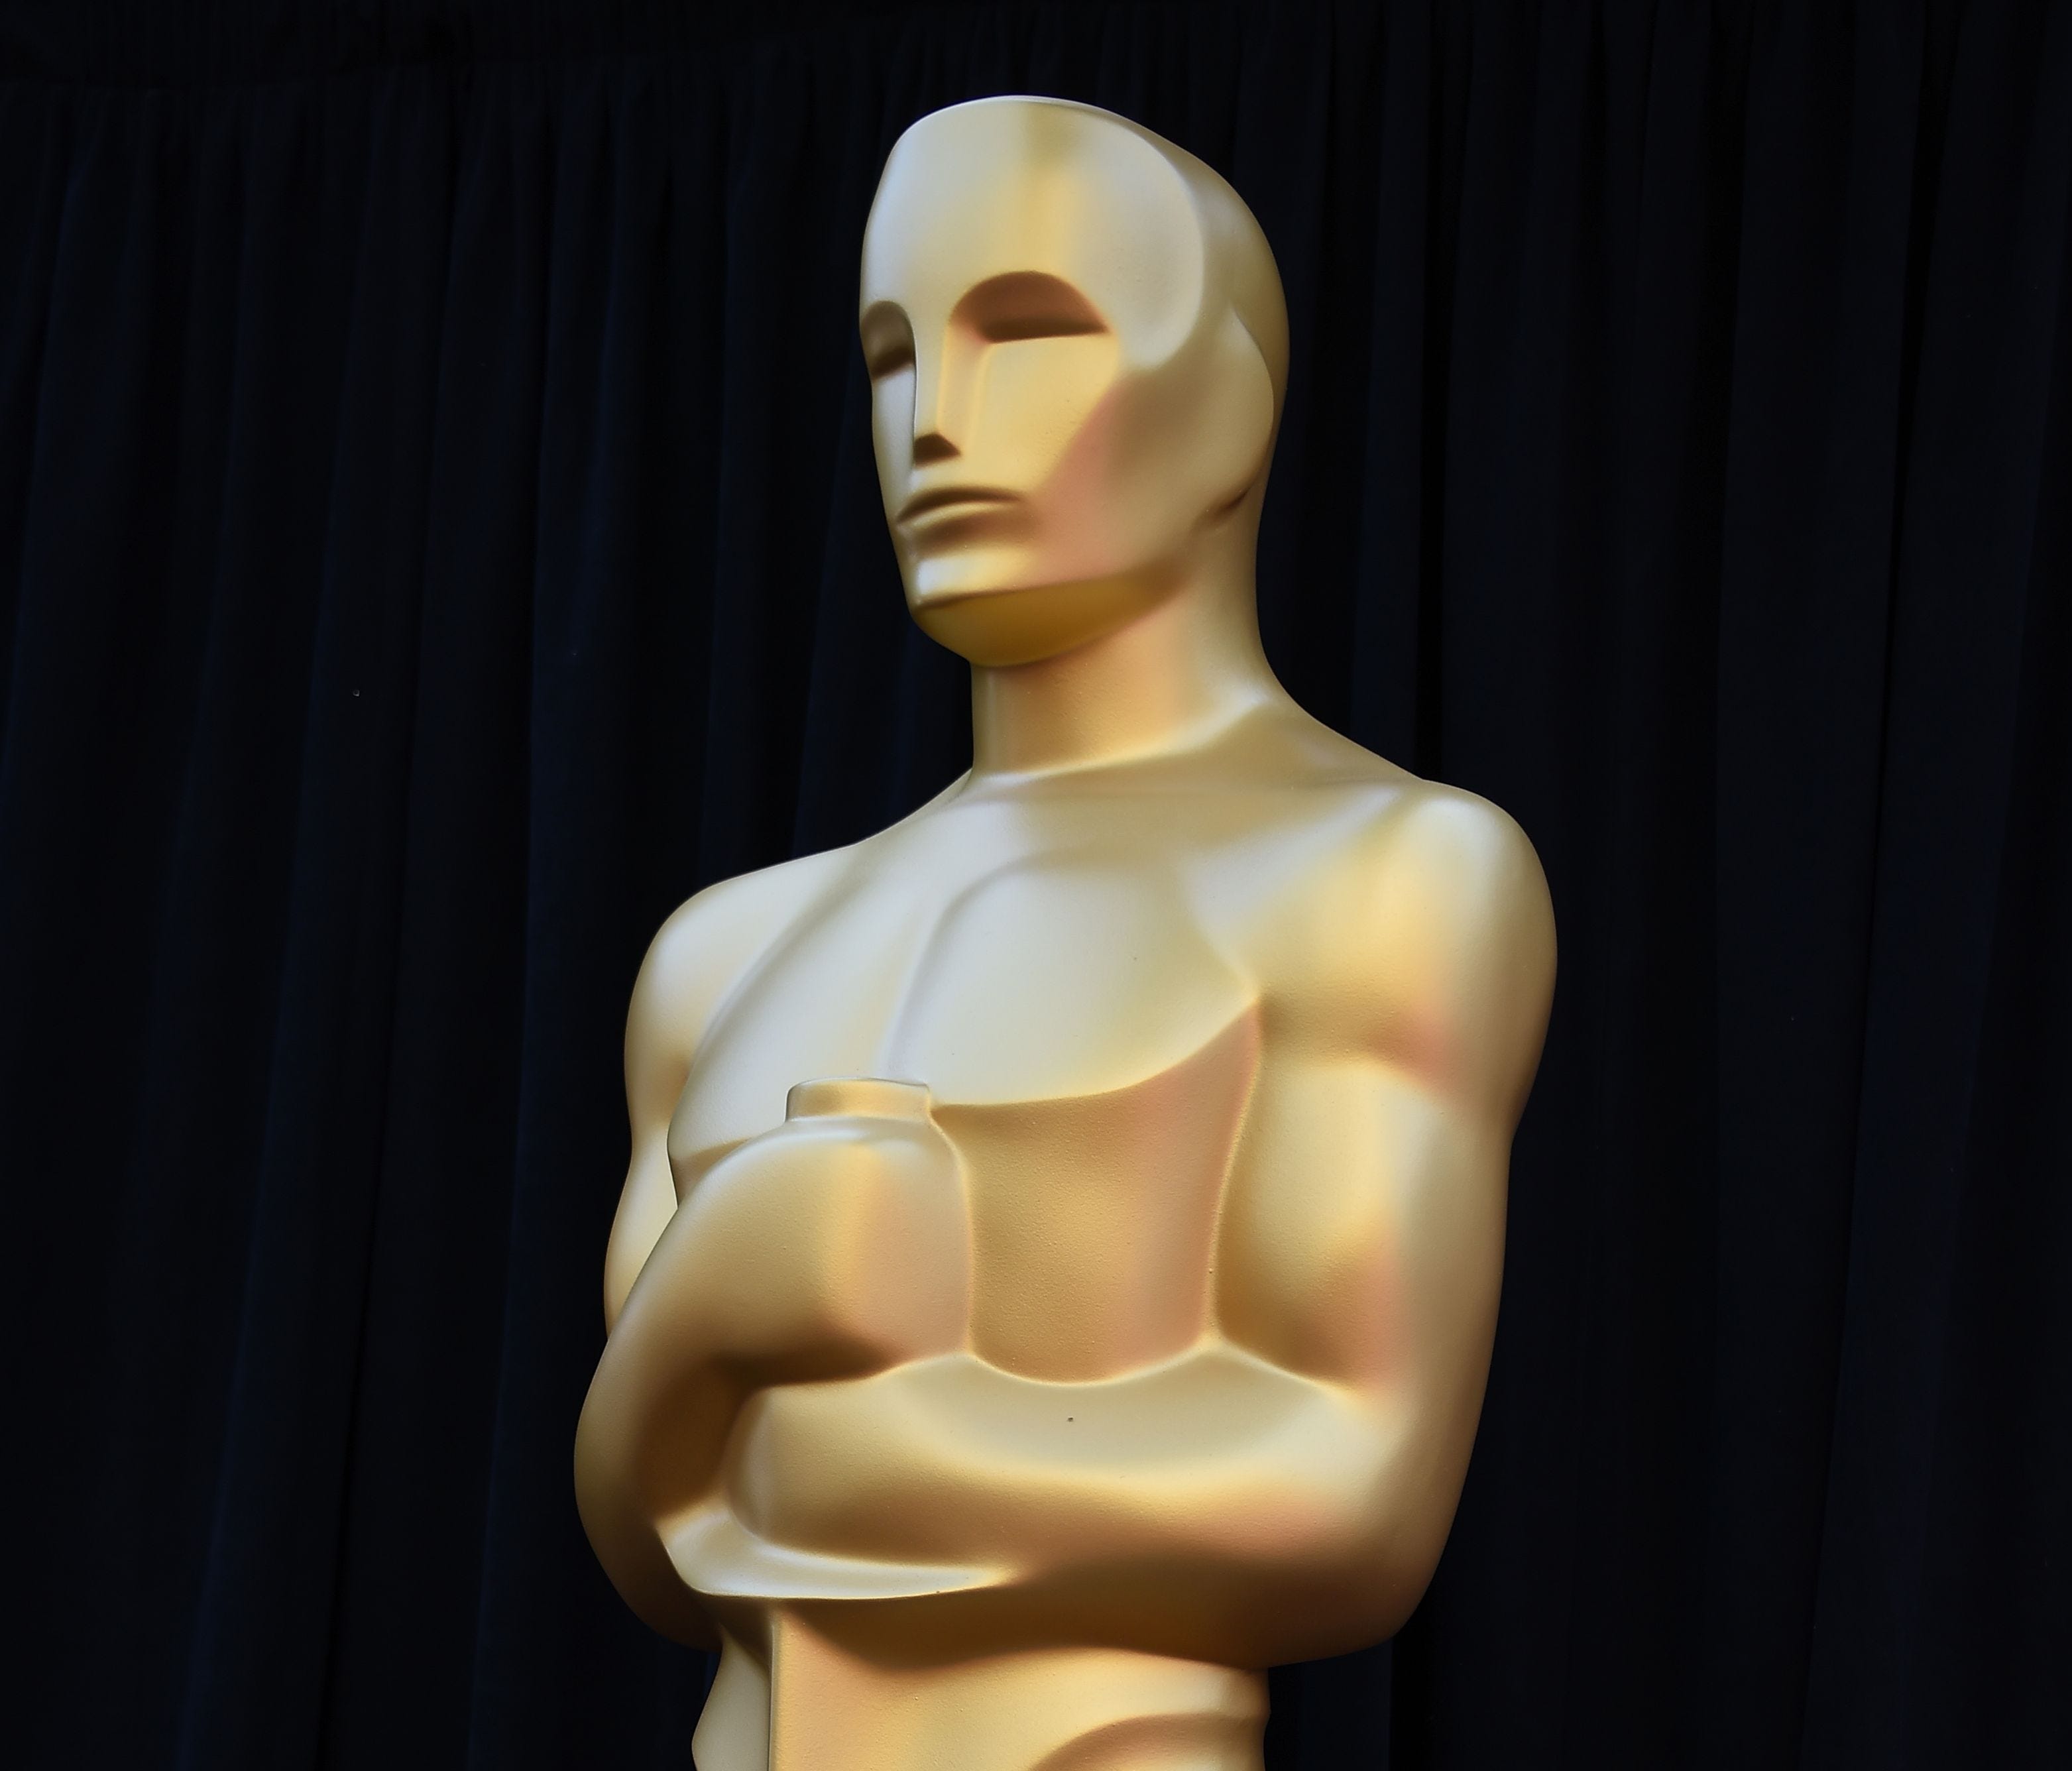 Who's in the running for an Oscar come March 4?